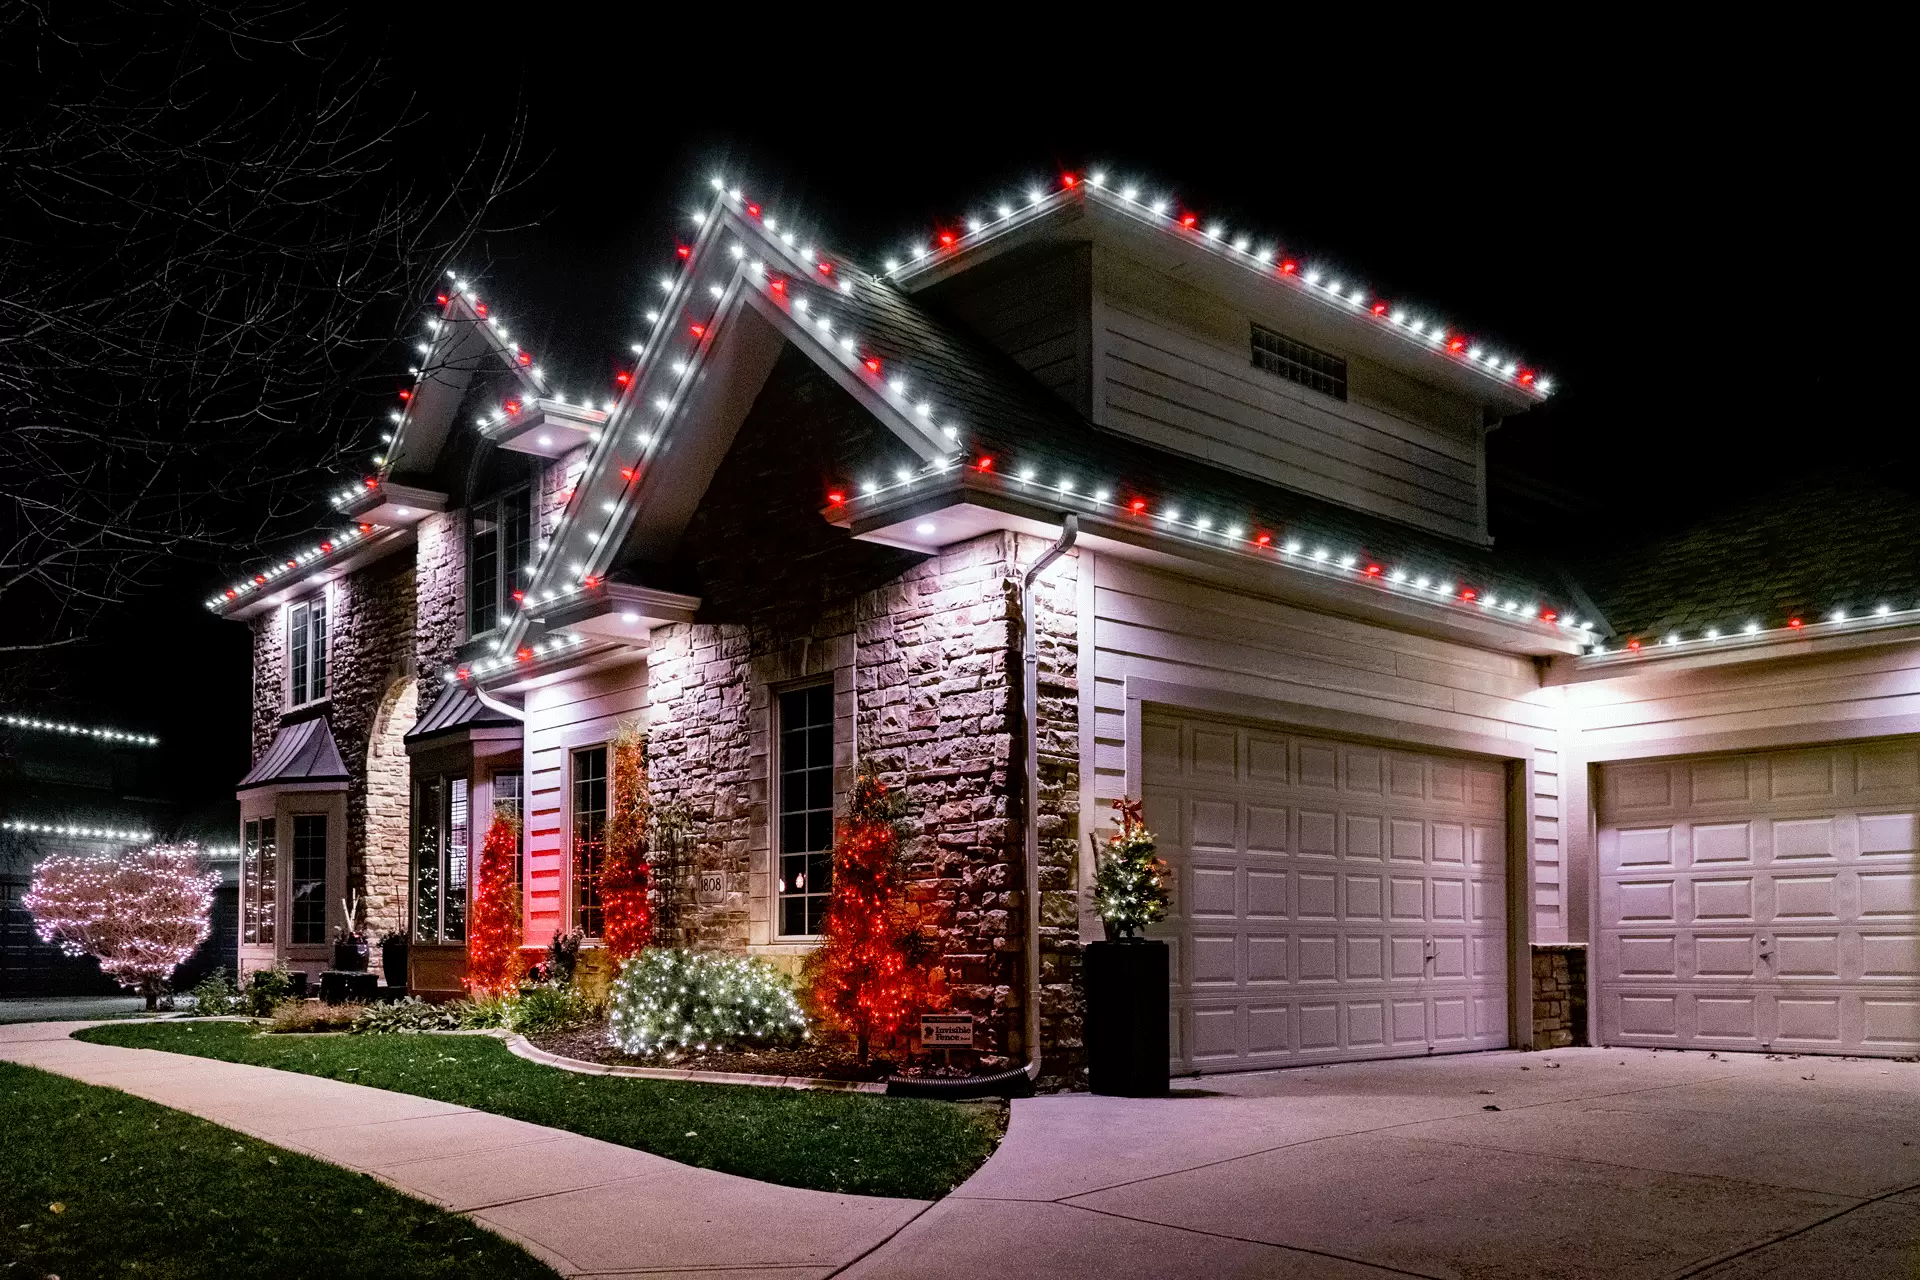 Ideas for decorating the house with outdoor Christmas lights